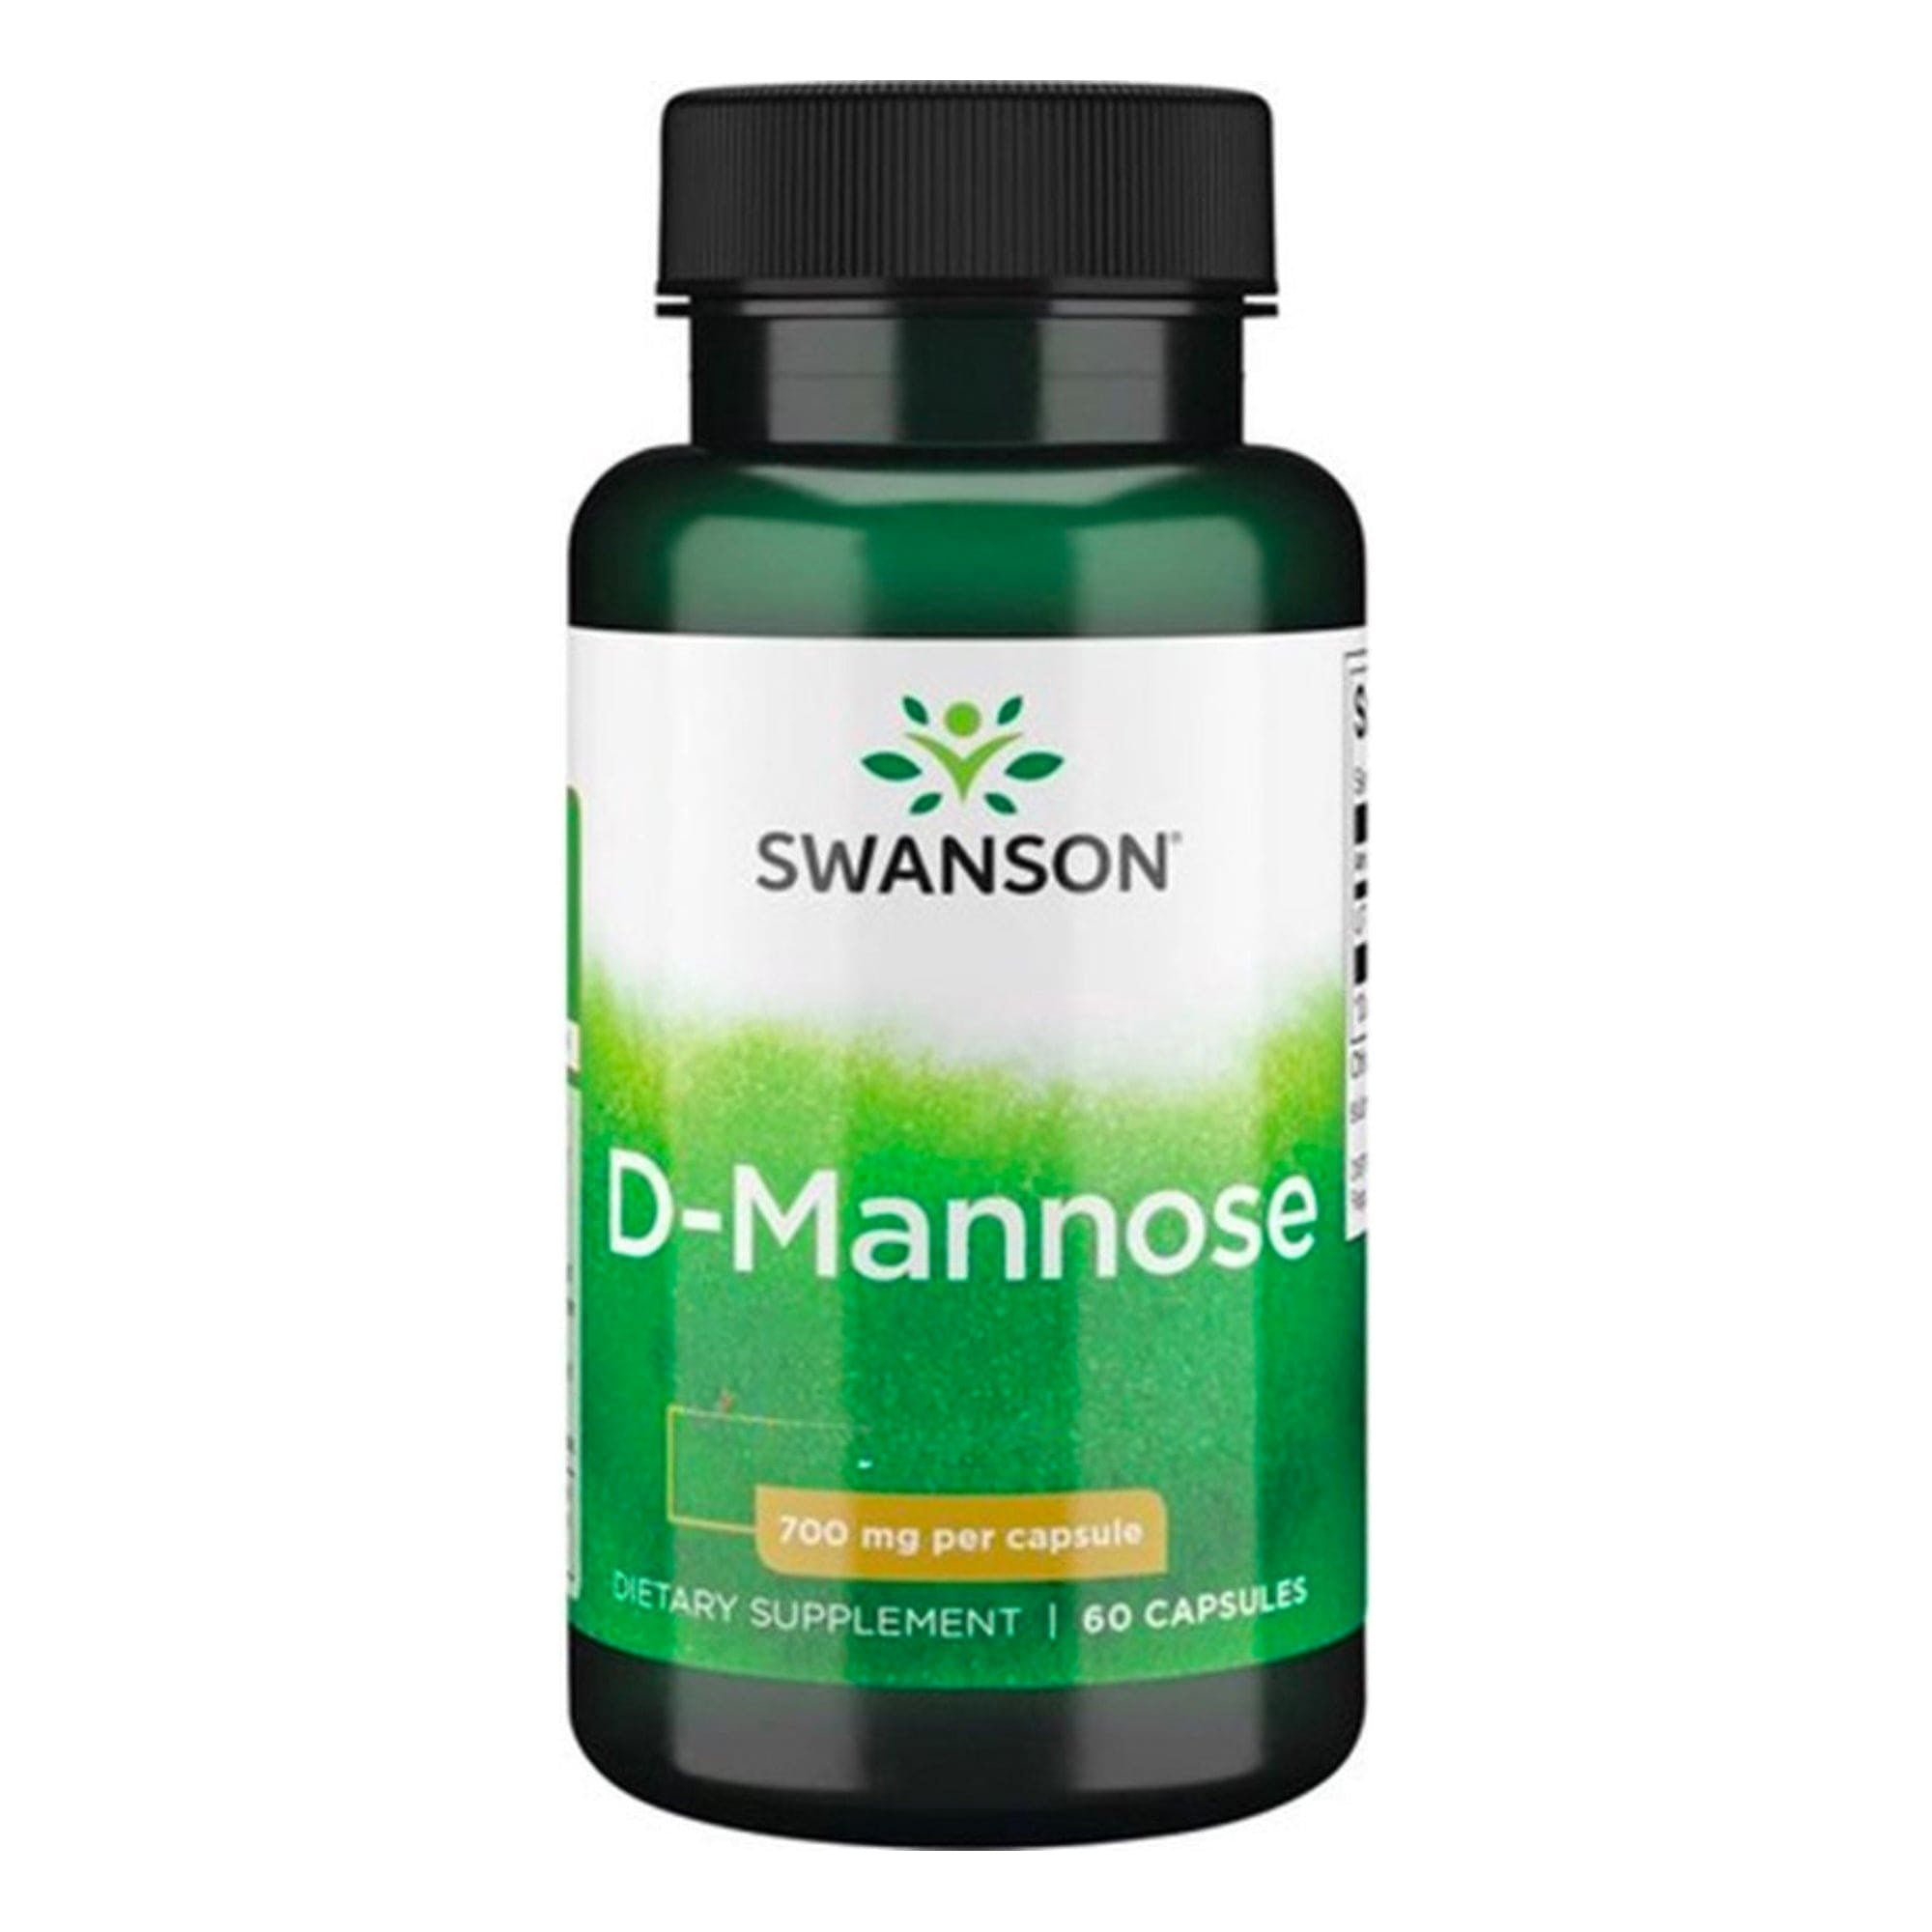 D-Mannose | 700 Mg | 60 Capsules | Swanson